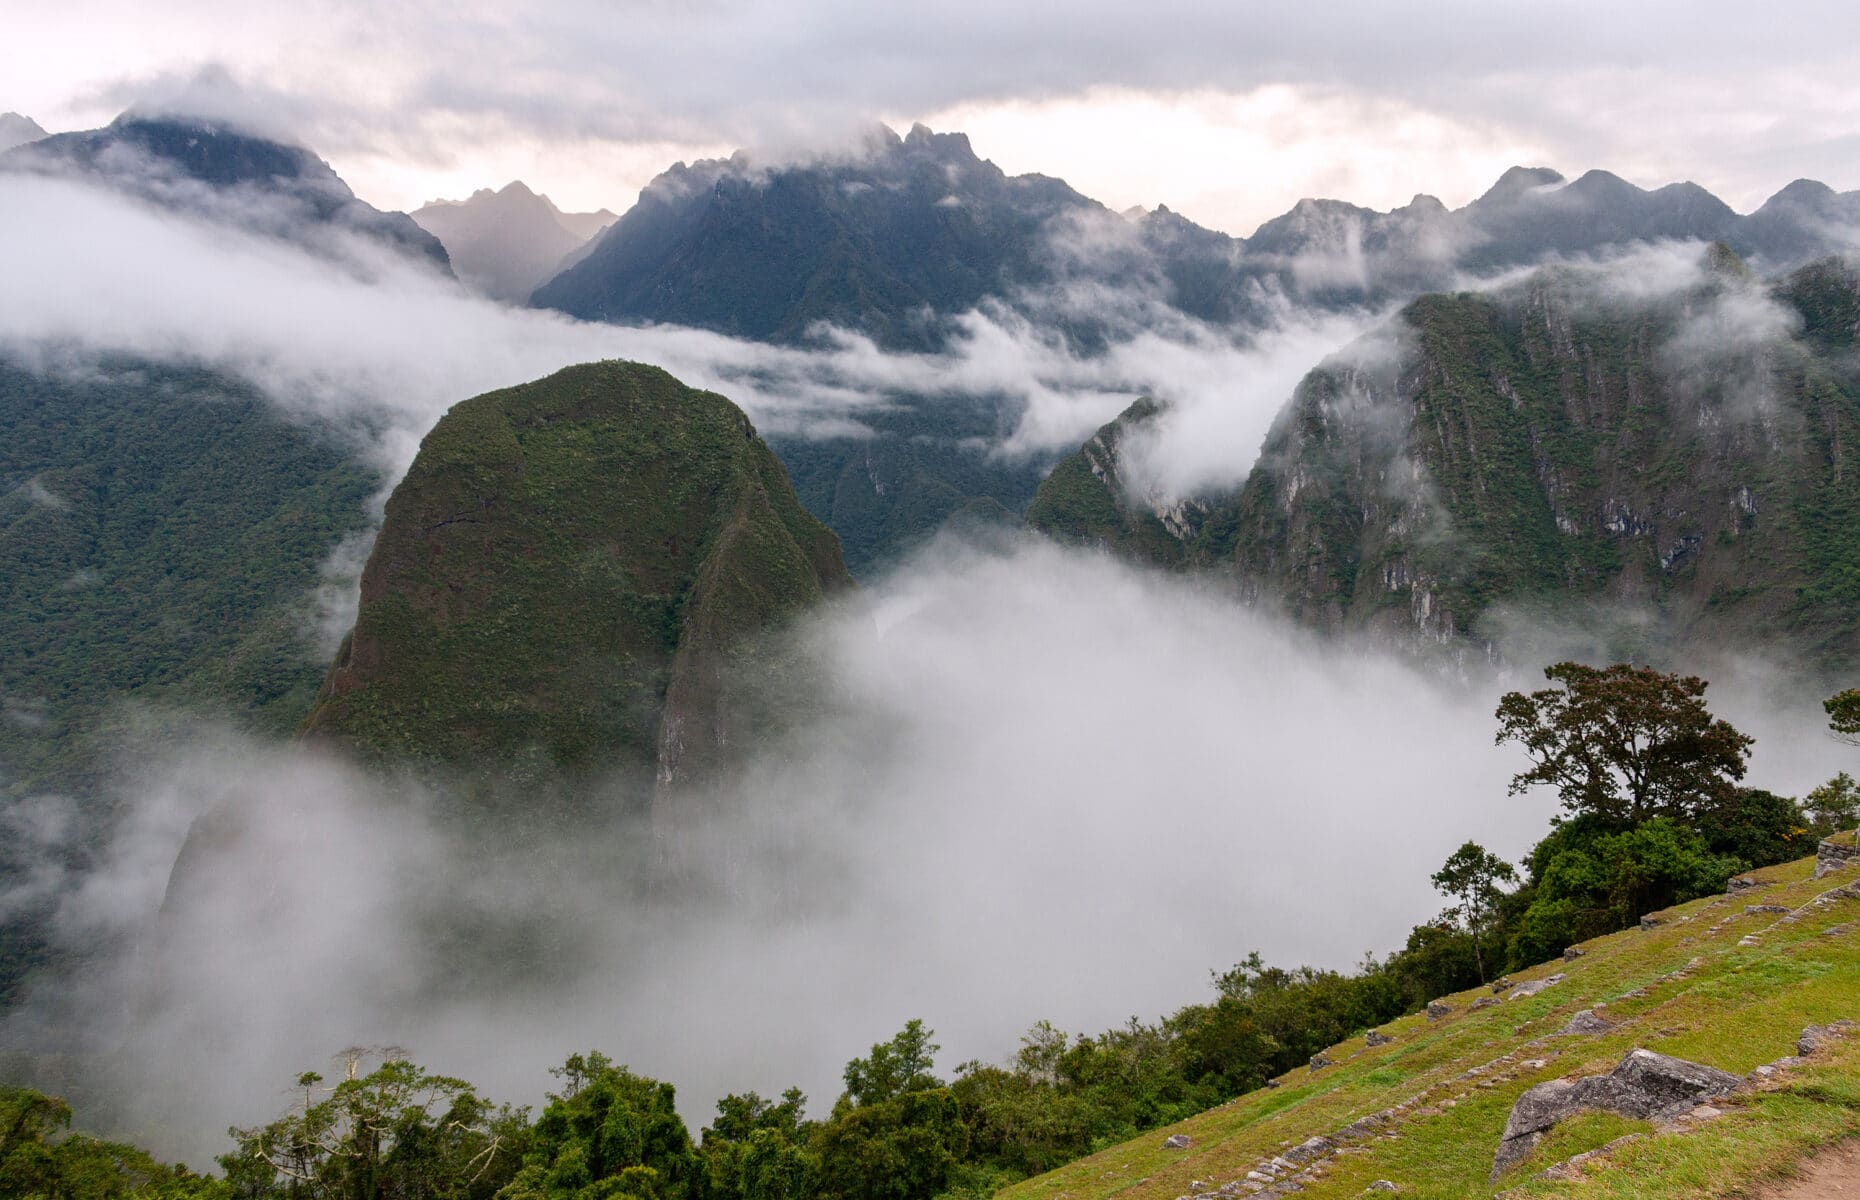 Clouds in the valleys of the Andes Mountains in Peru, South America.